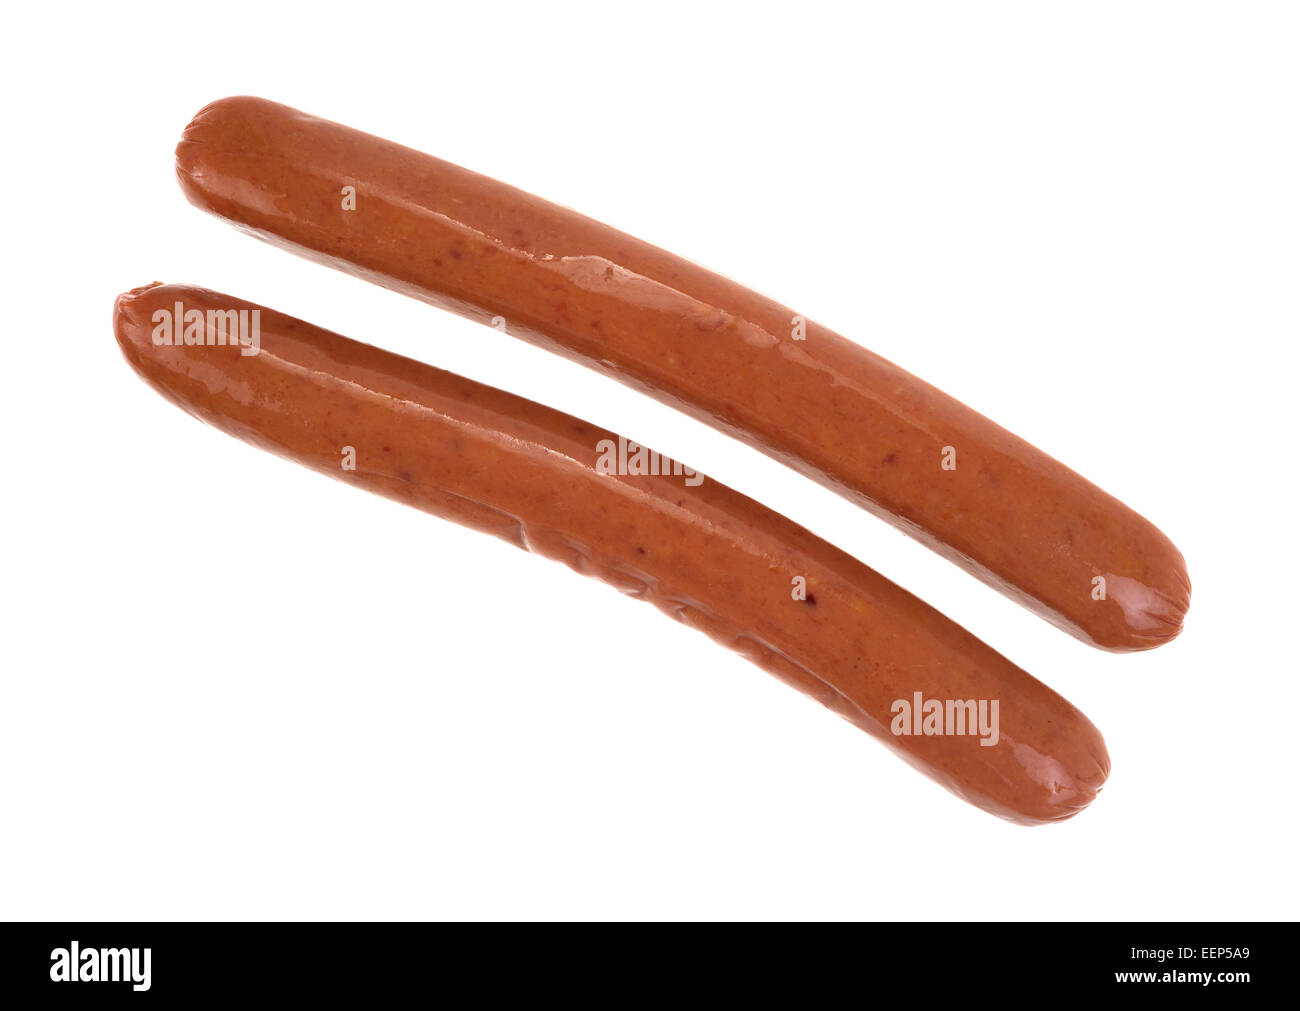 Two long links of smoked sausages on a white background. Stock Photo